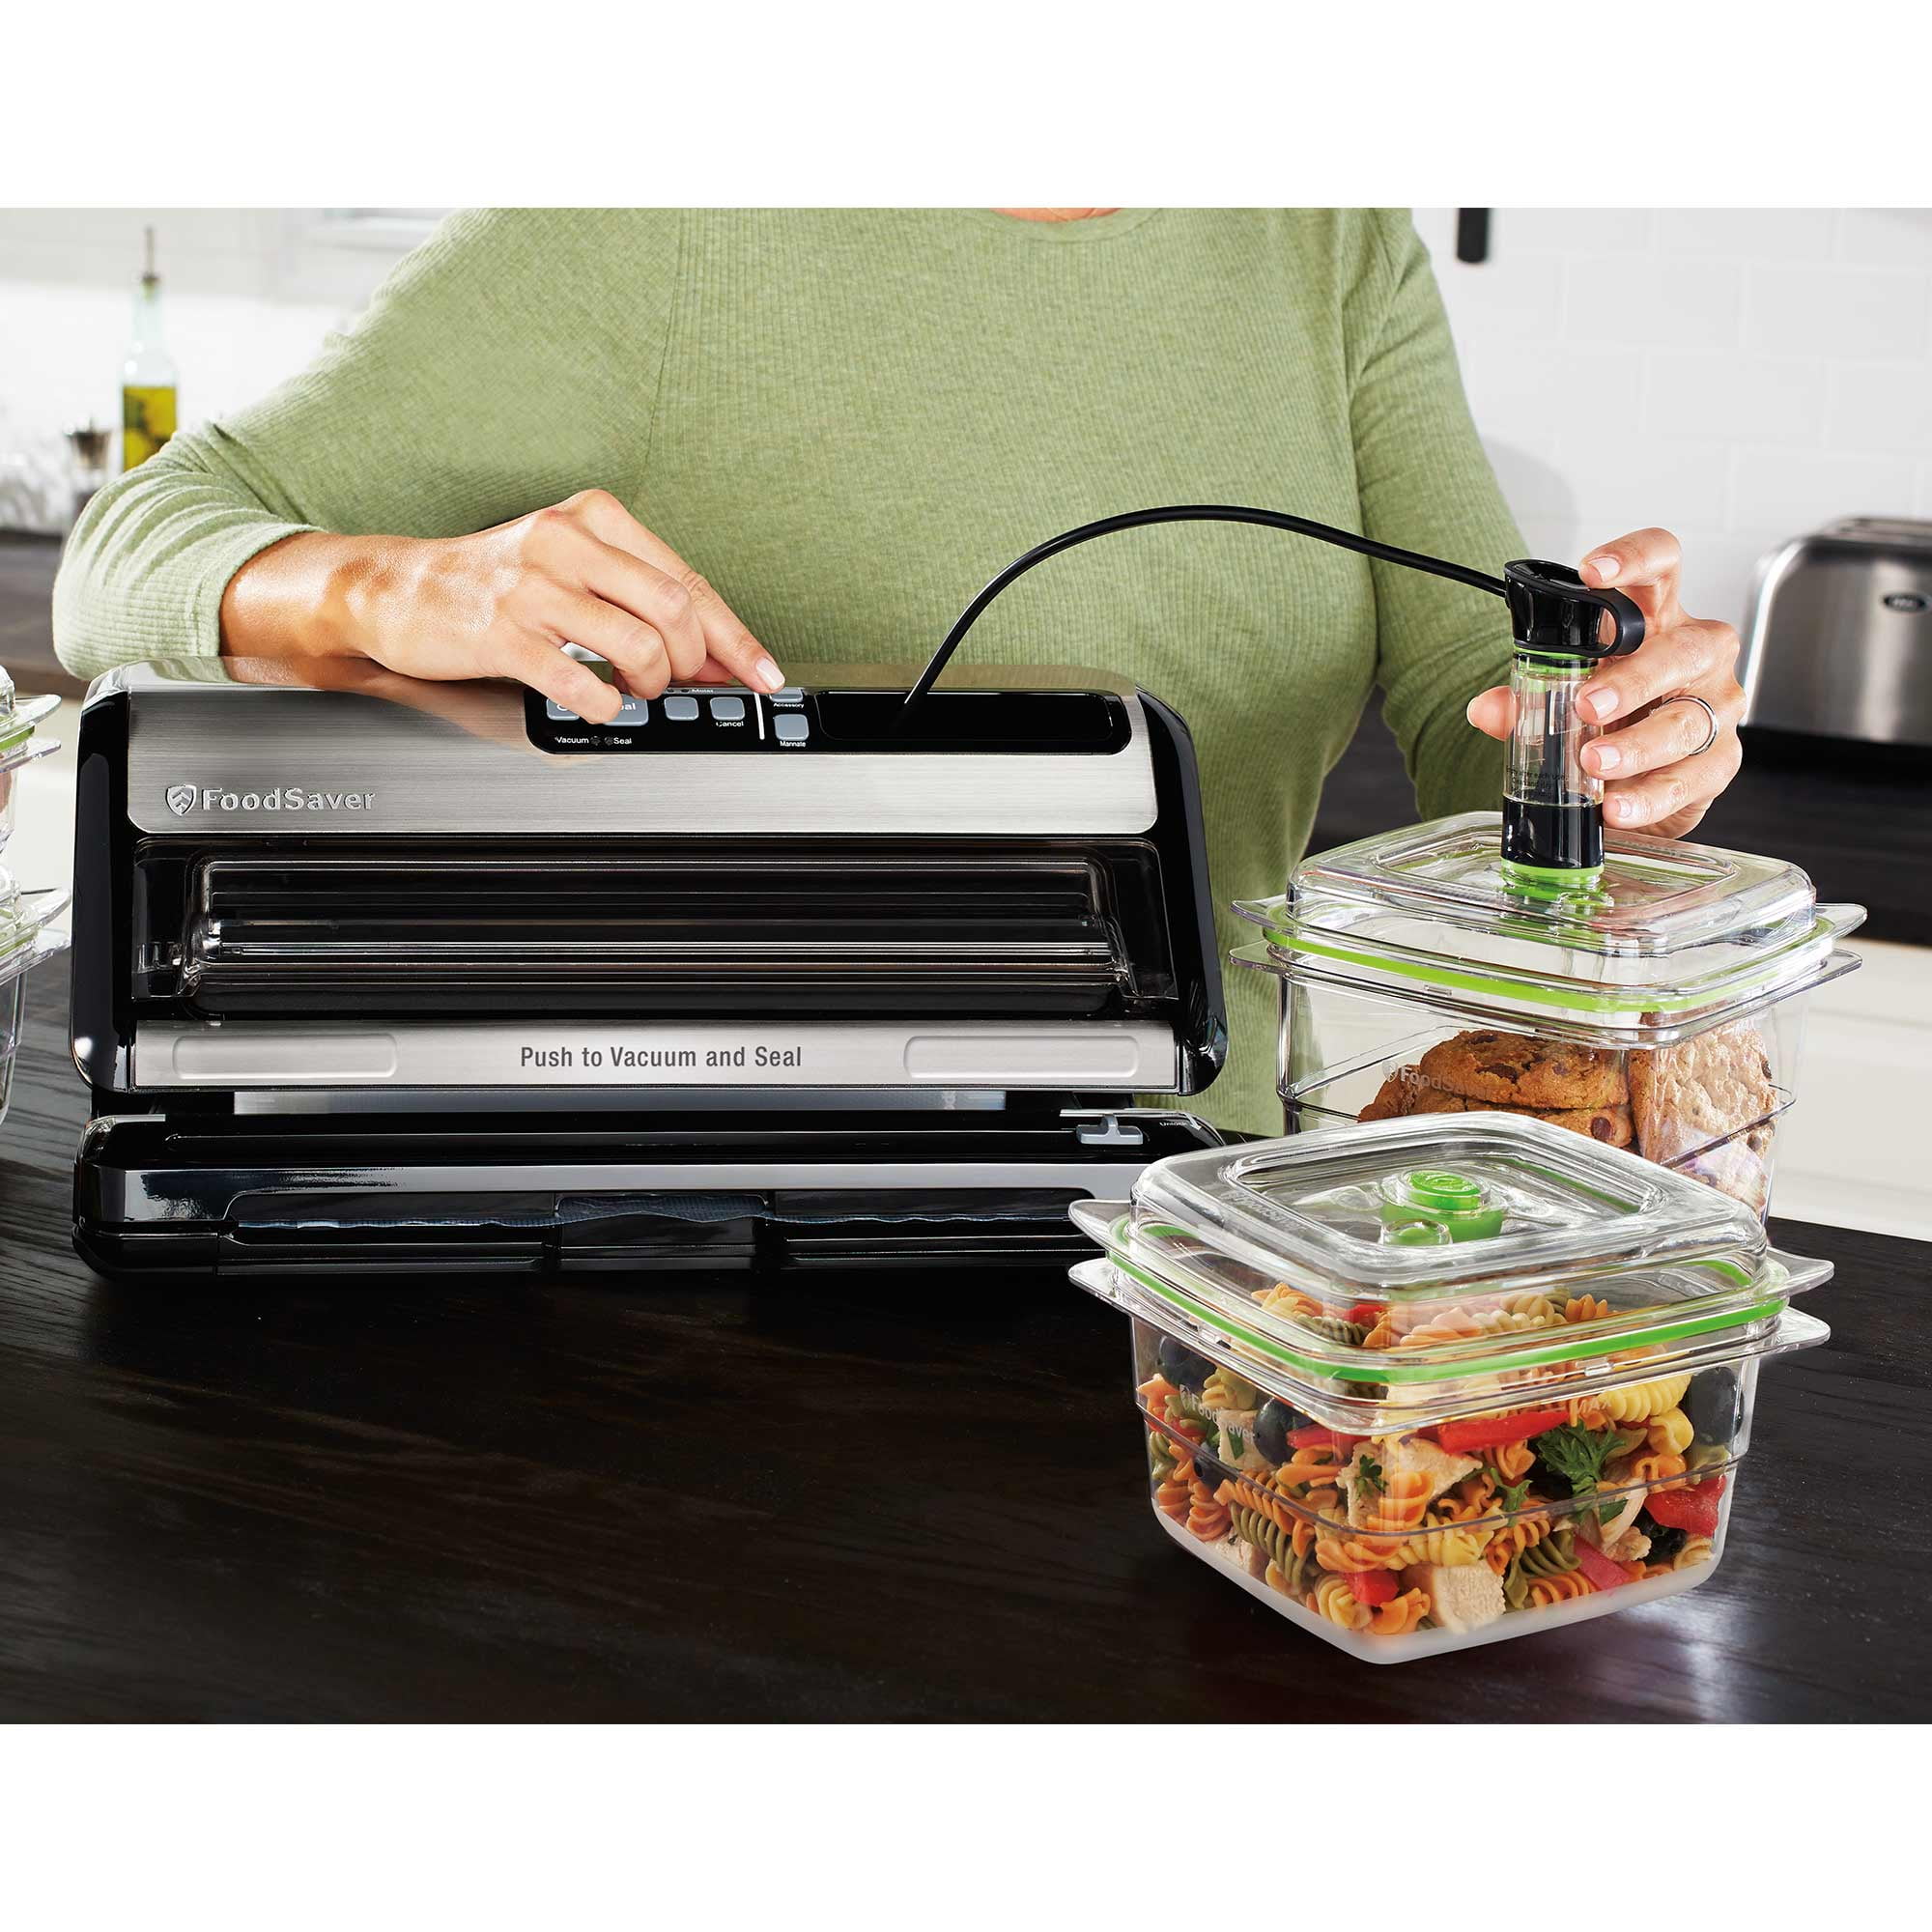 FoodSaver 2-in-1 Food Preservation System: Saves Money and Time